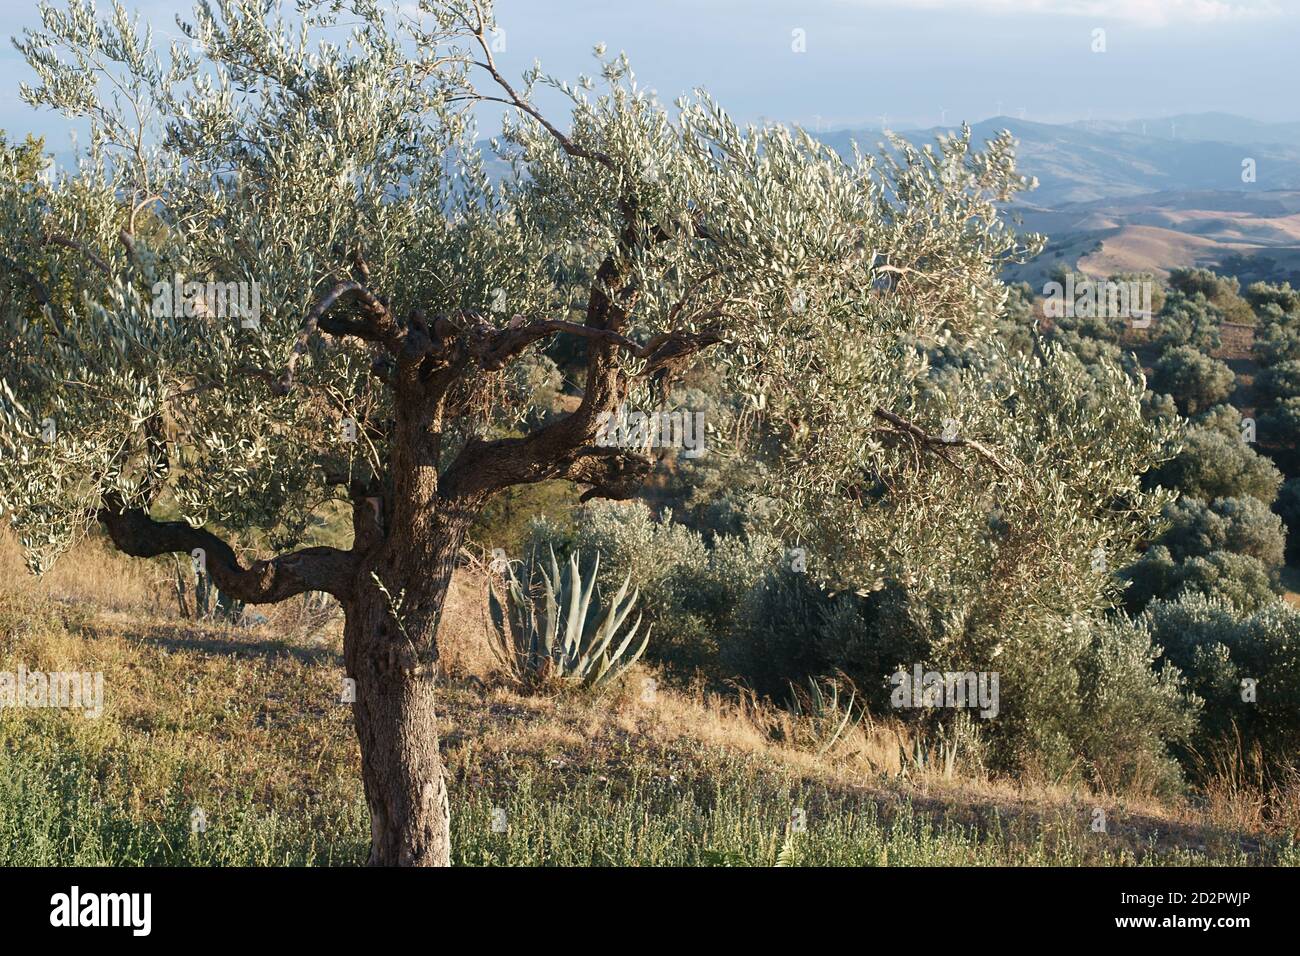 Landscape with olive tree from the deserted village of Craco, close to Matera, Basilicata, Italy Stock Photo